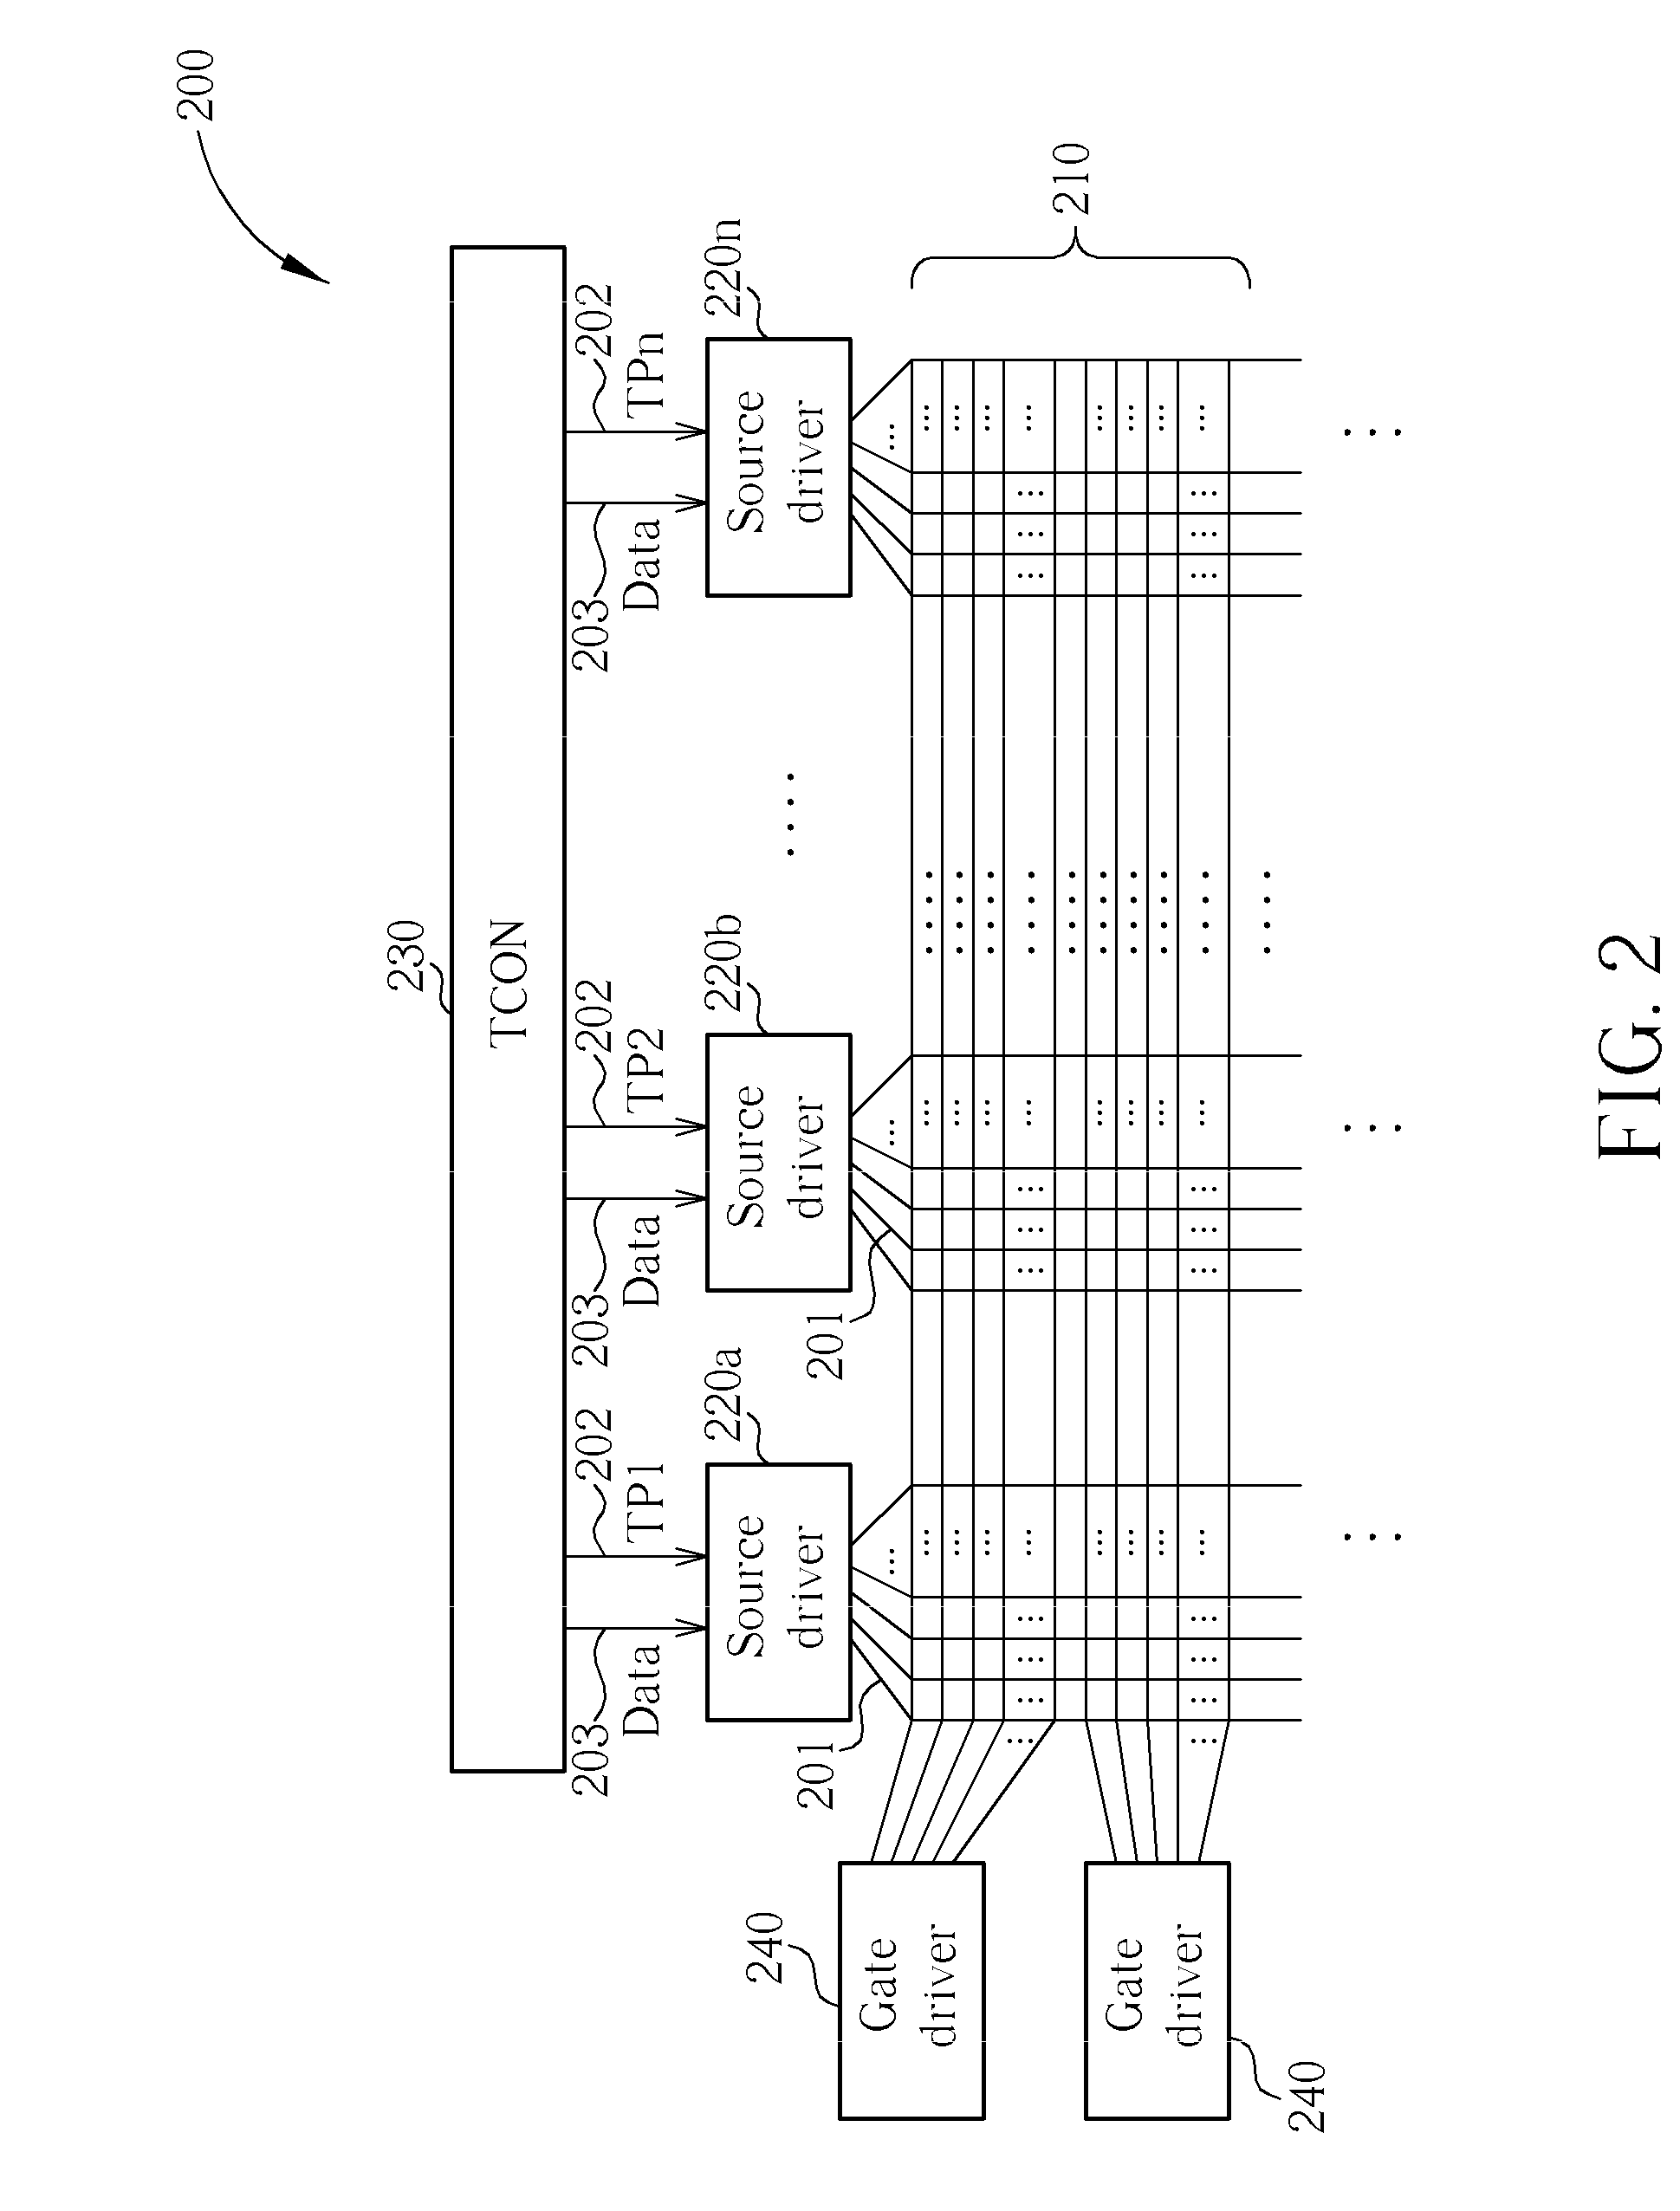 Display controlling system utilizing non-identical transfer pulse signals to control display and controlling method thereof